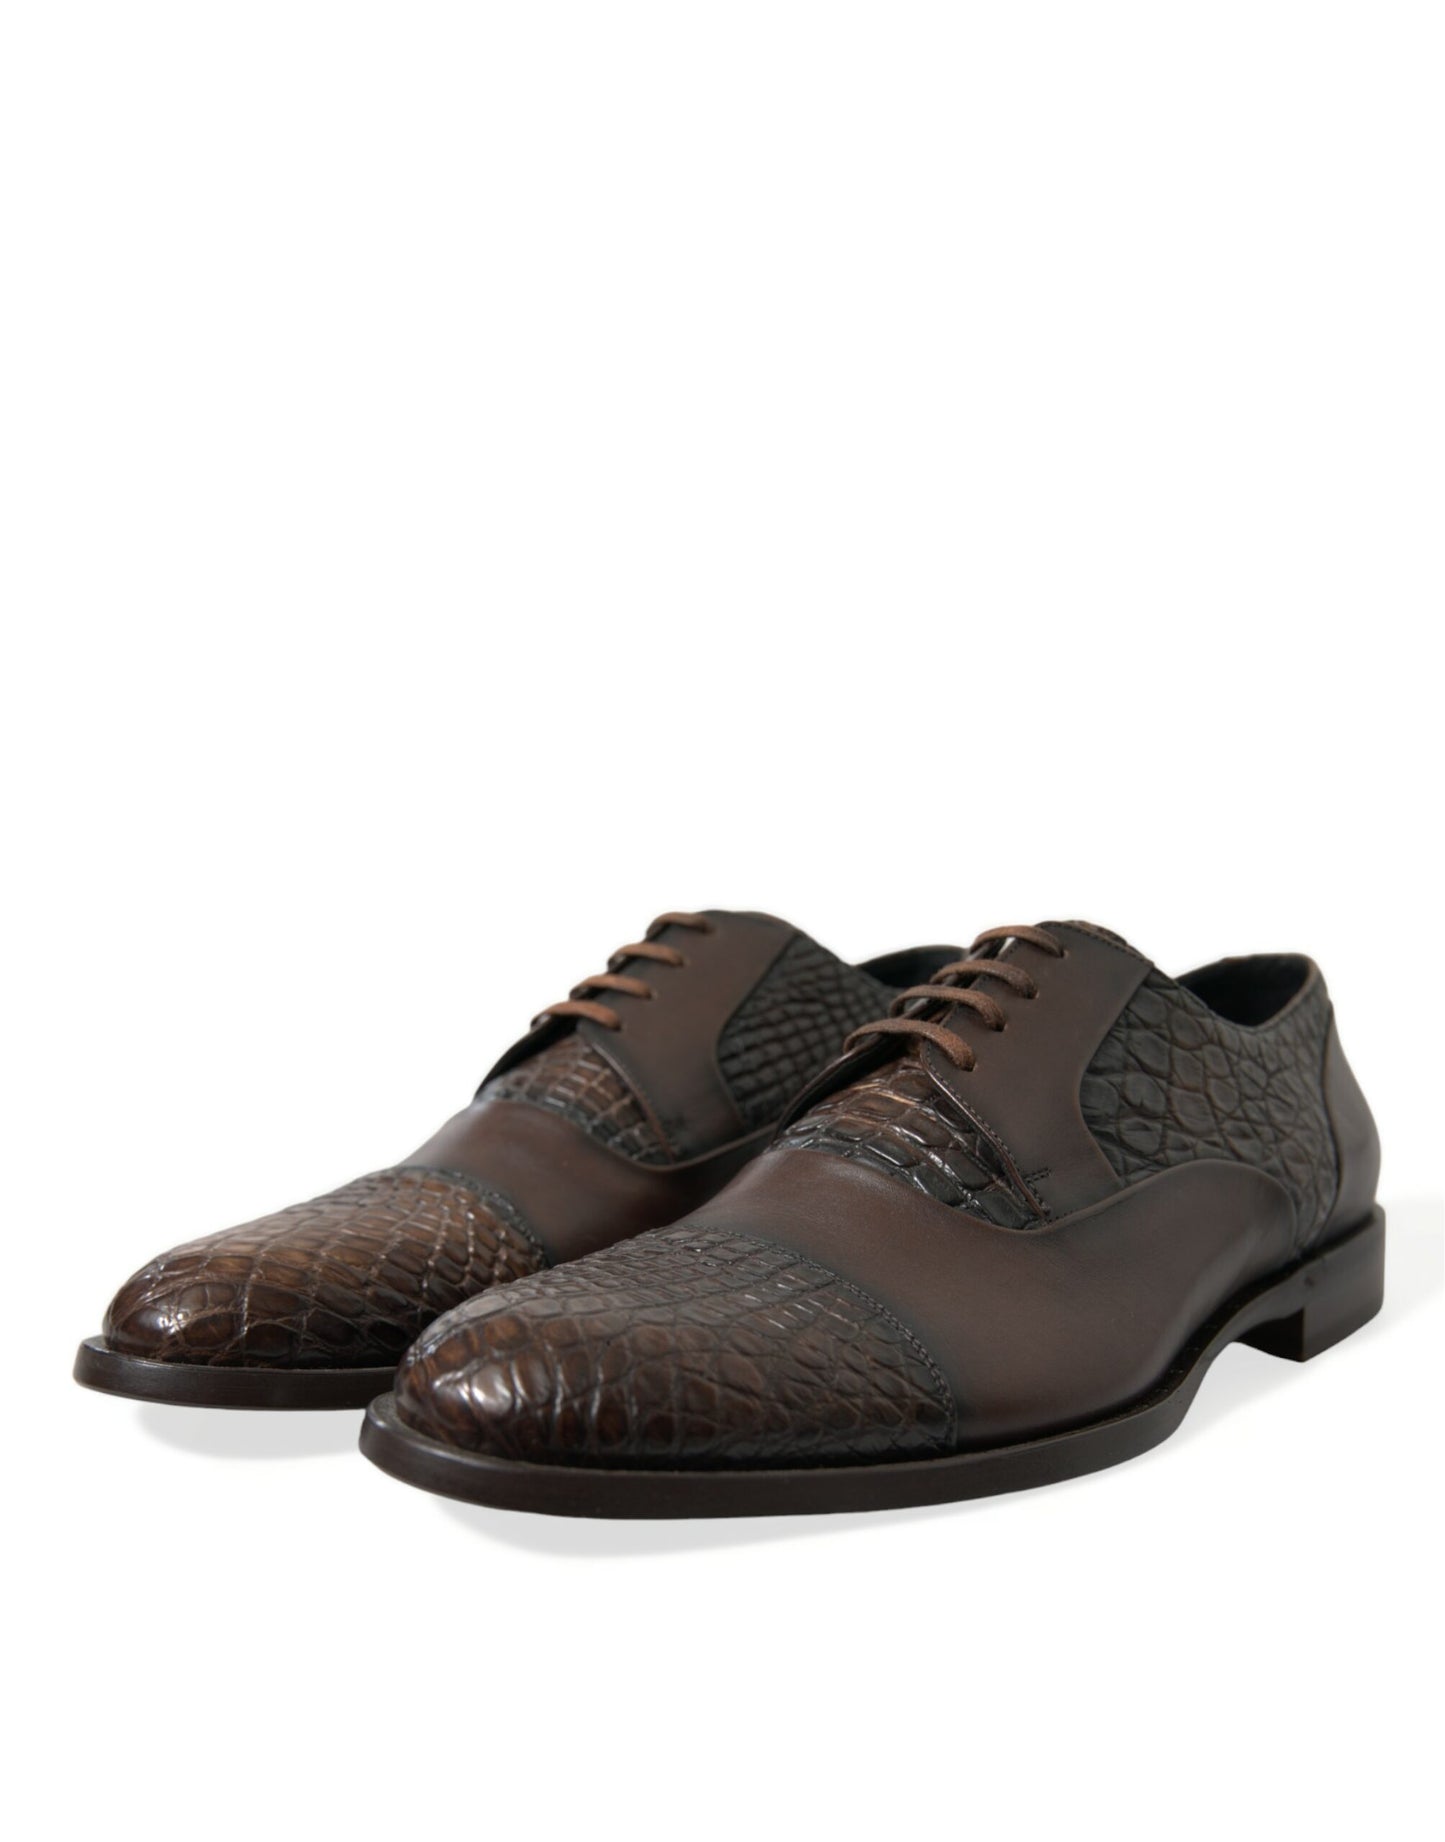 Elegant Textured Leather Oxford Dress Shoes